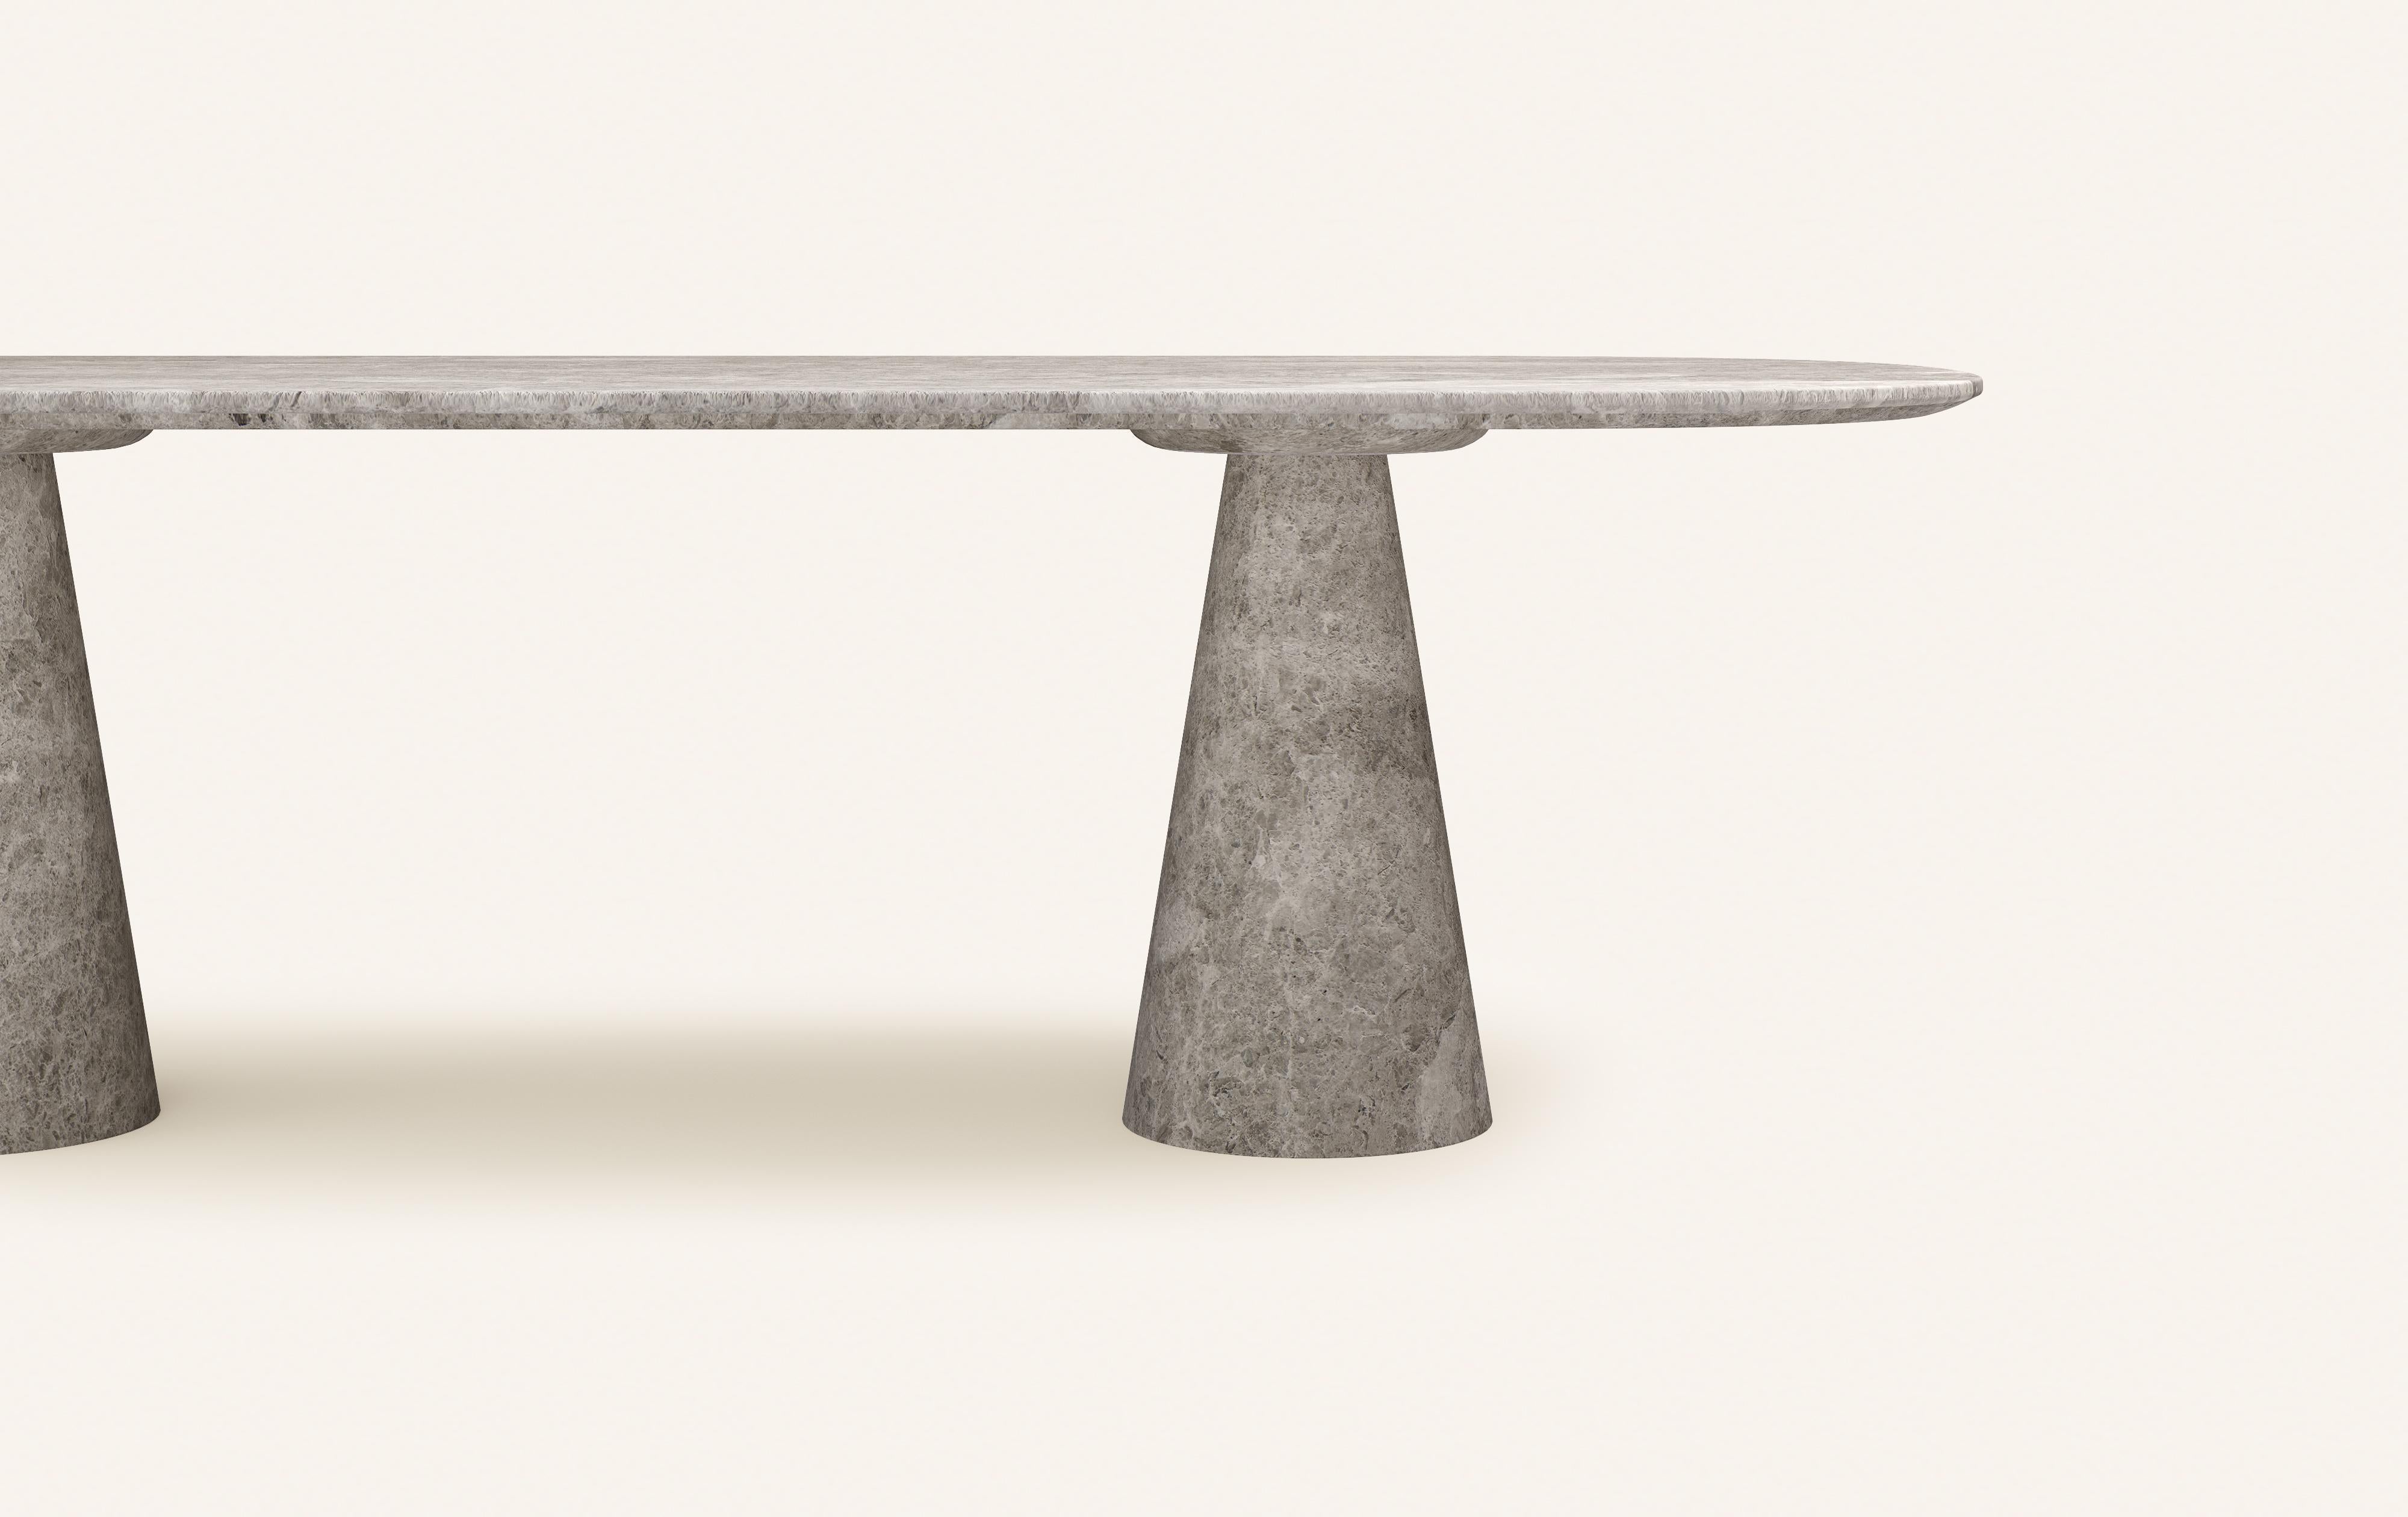 Organic Modern FORM(LA) Cono Oval Dining Table 96”L x 42”W x 30”H Tundra Gray Marble For Sale